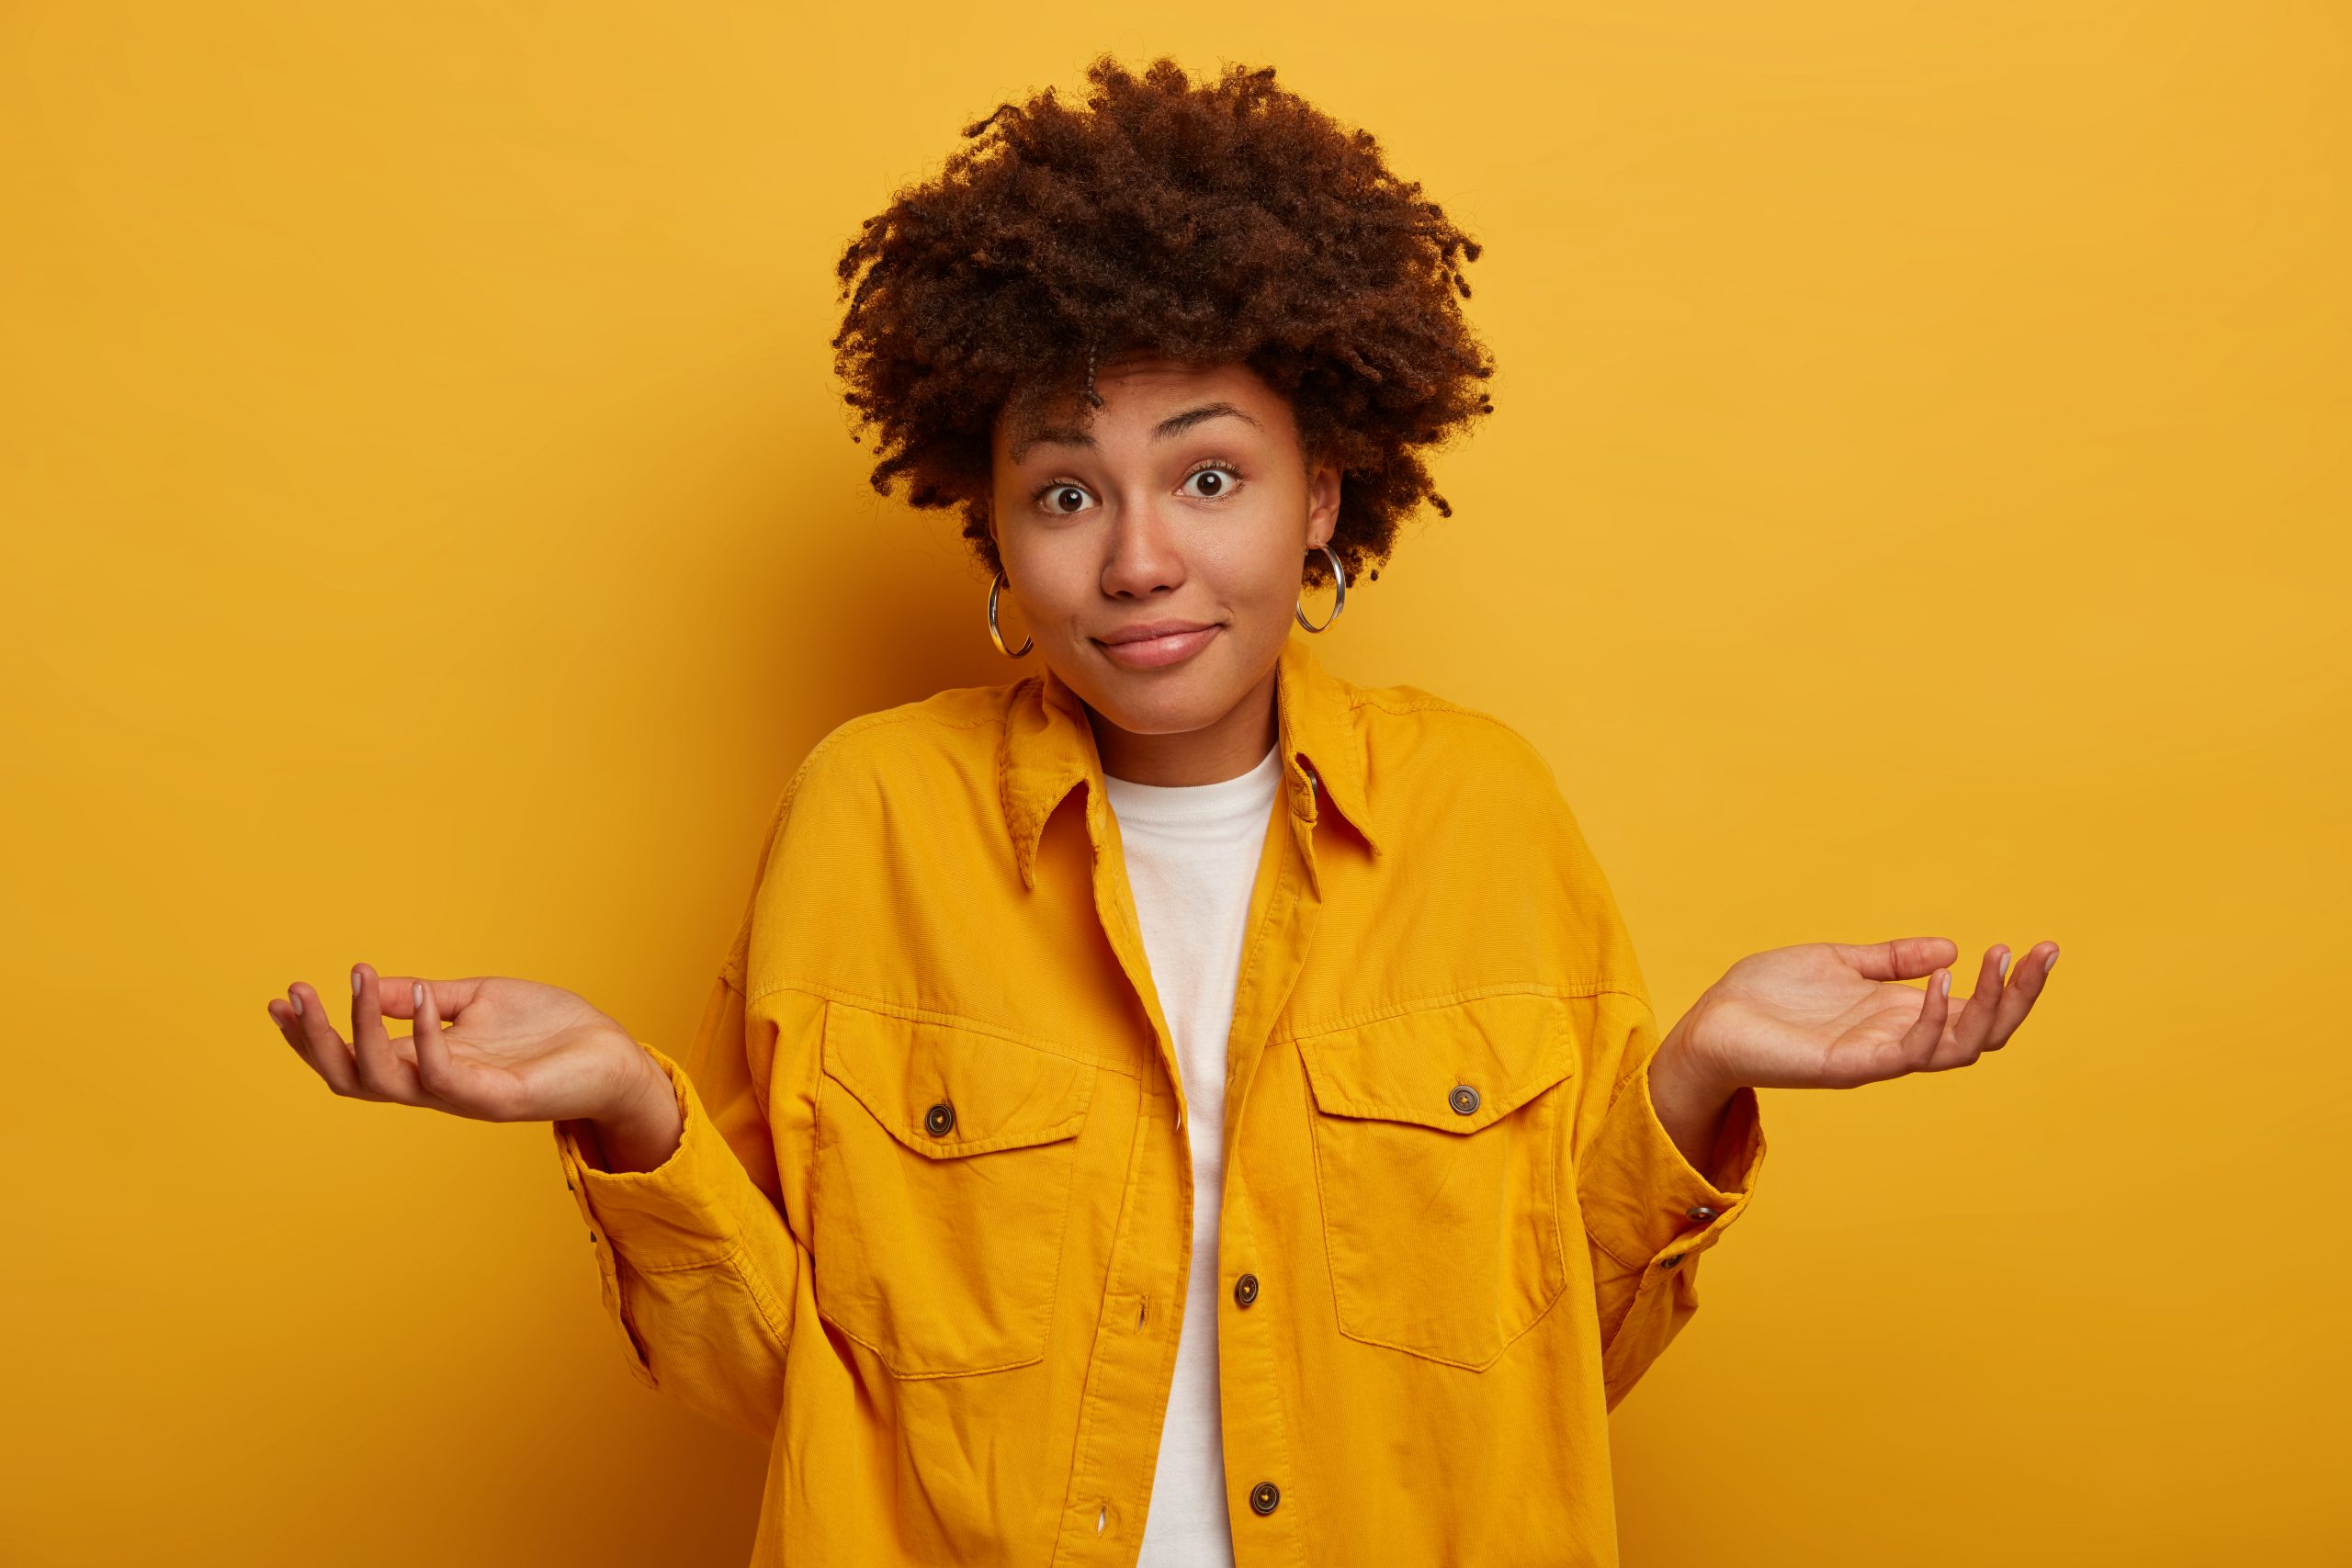 puzzled-clueless-african-american-lady-shrugs-shoulders-and-expresses-uncertainty-makes-decision-wears-fashionable-clothing-spreads-palms-sideways-isolated-on-yellow-wall-life-perception-attitude